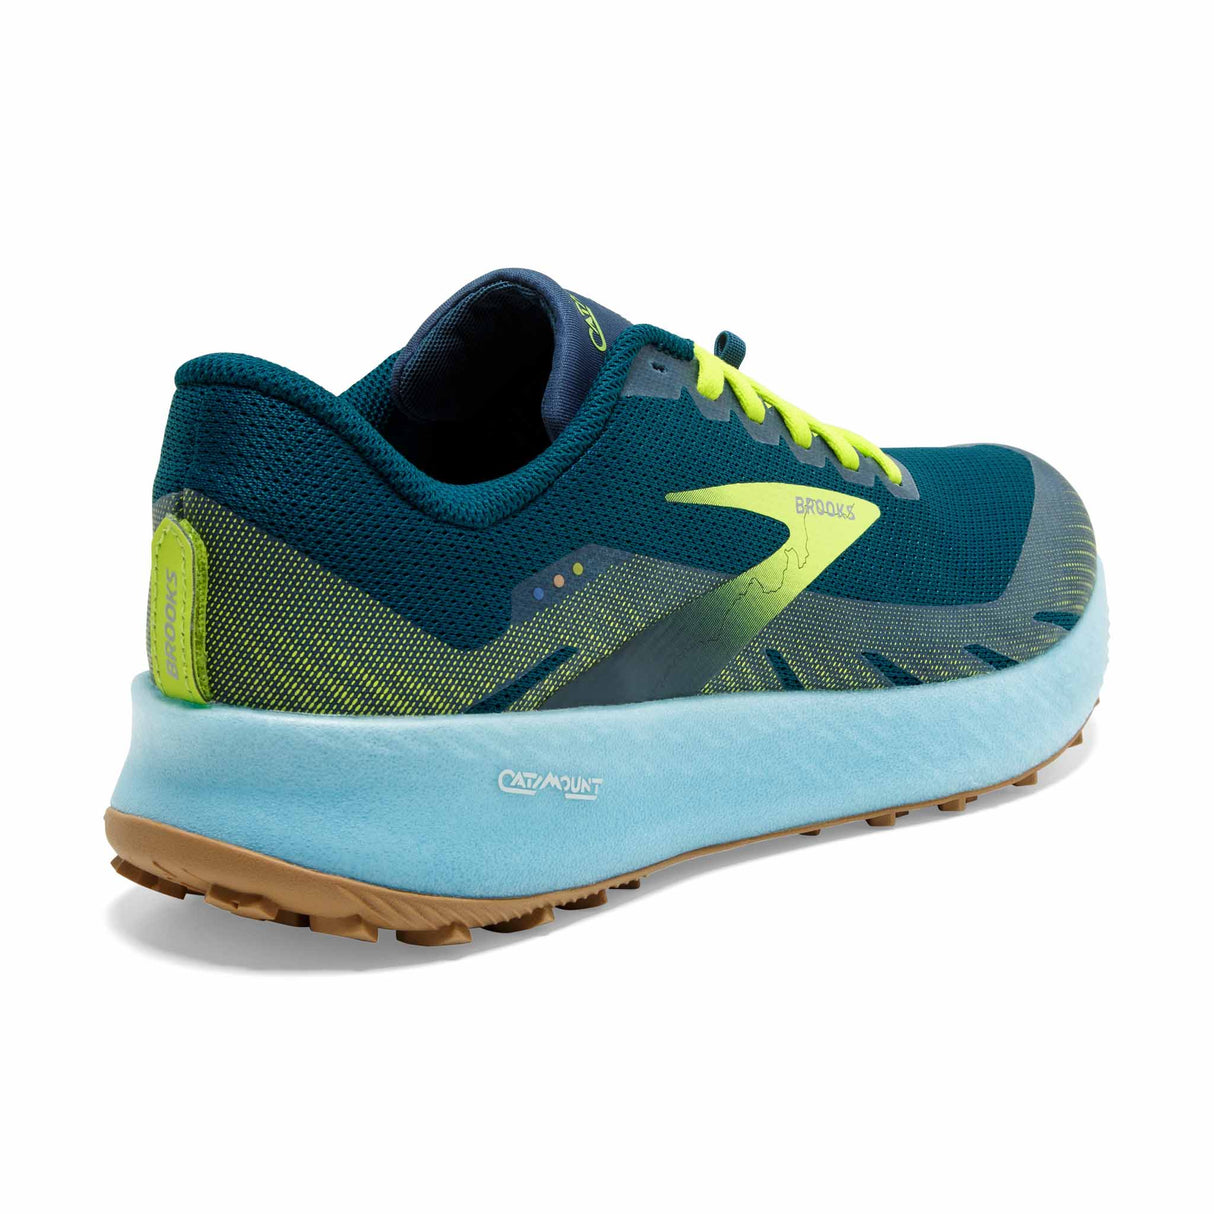 Brooks Catamount chaussures de course à pied trail homme - Blue / Lime / Biscuit - angle 2